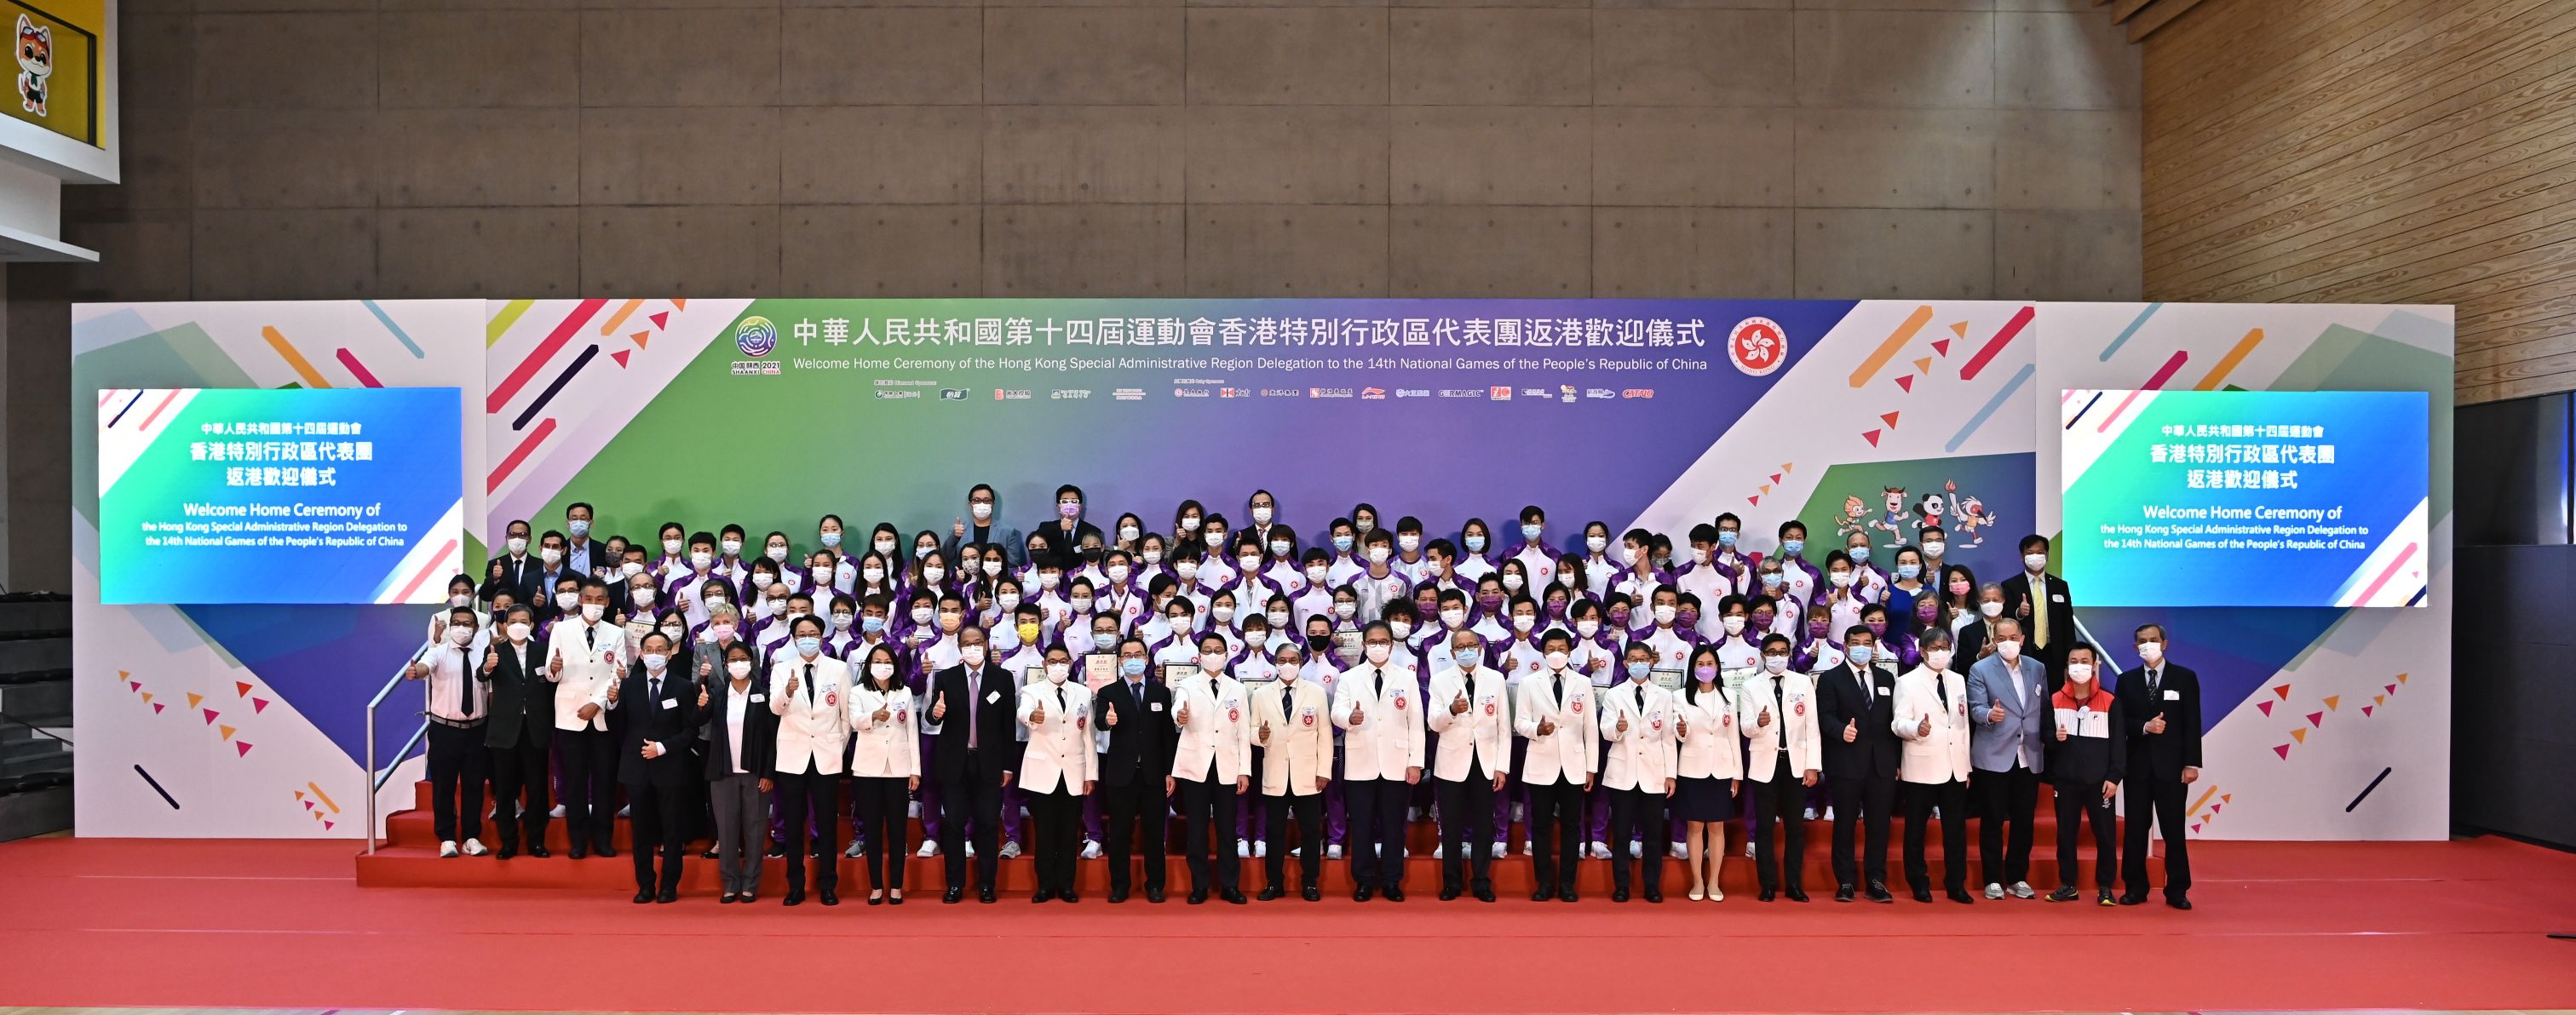 Group photo of guests and members of the HKSAR Delegation to the 14th National Games at the Welcome Home Ceremony.